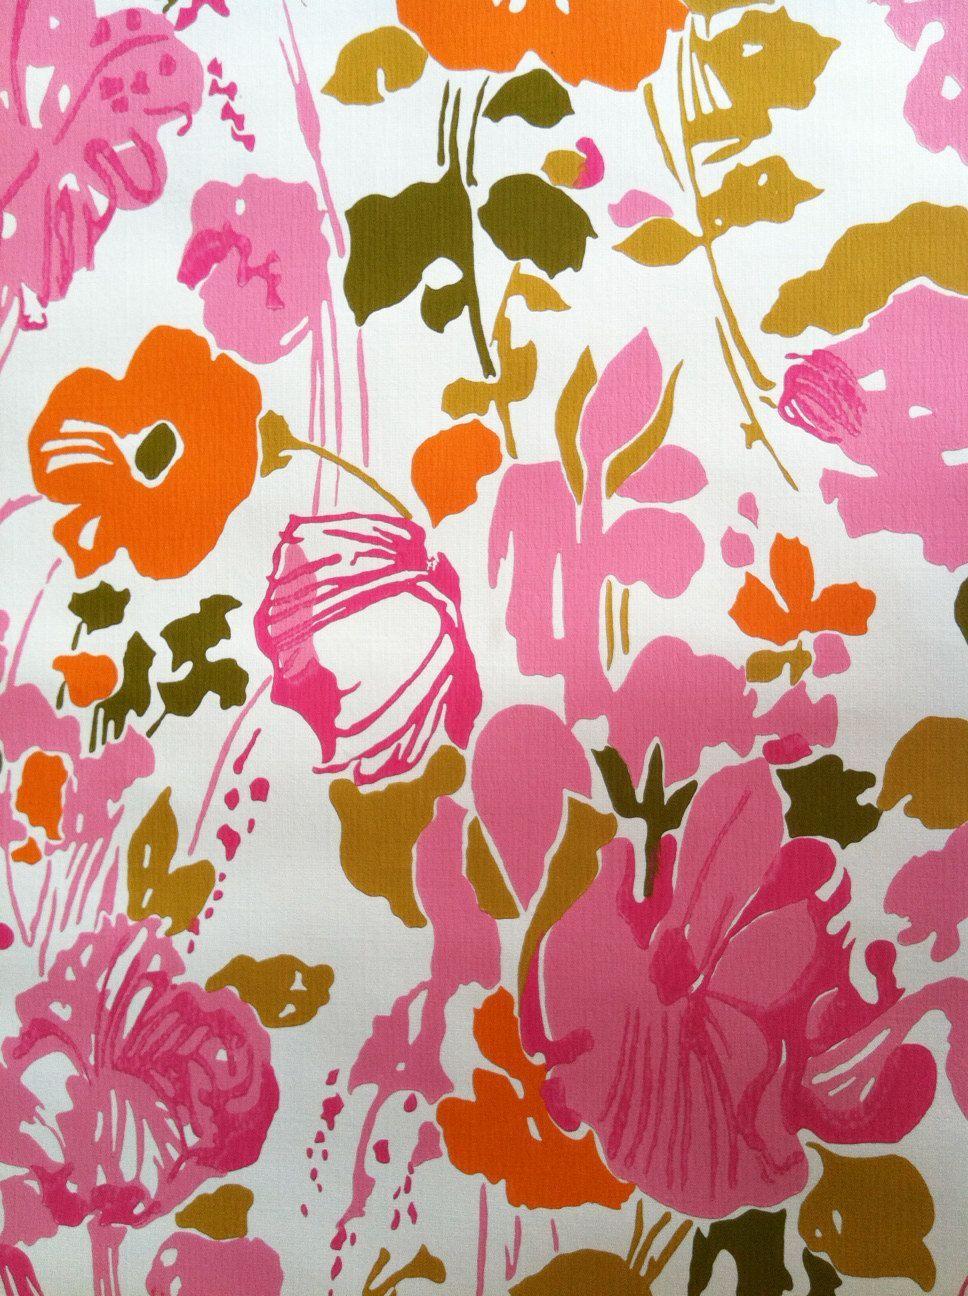 Vintage 1960s Wallpaper Whimsical Pink Poppies By The Yard. Pink